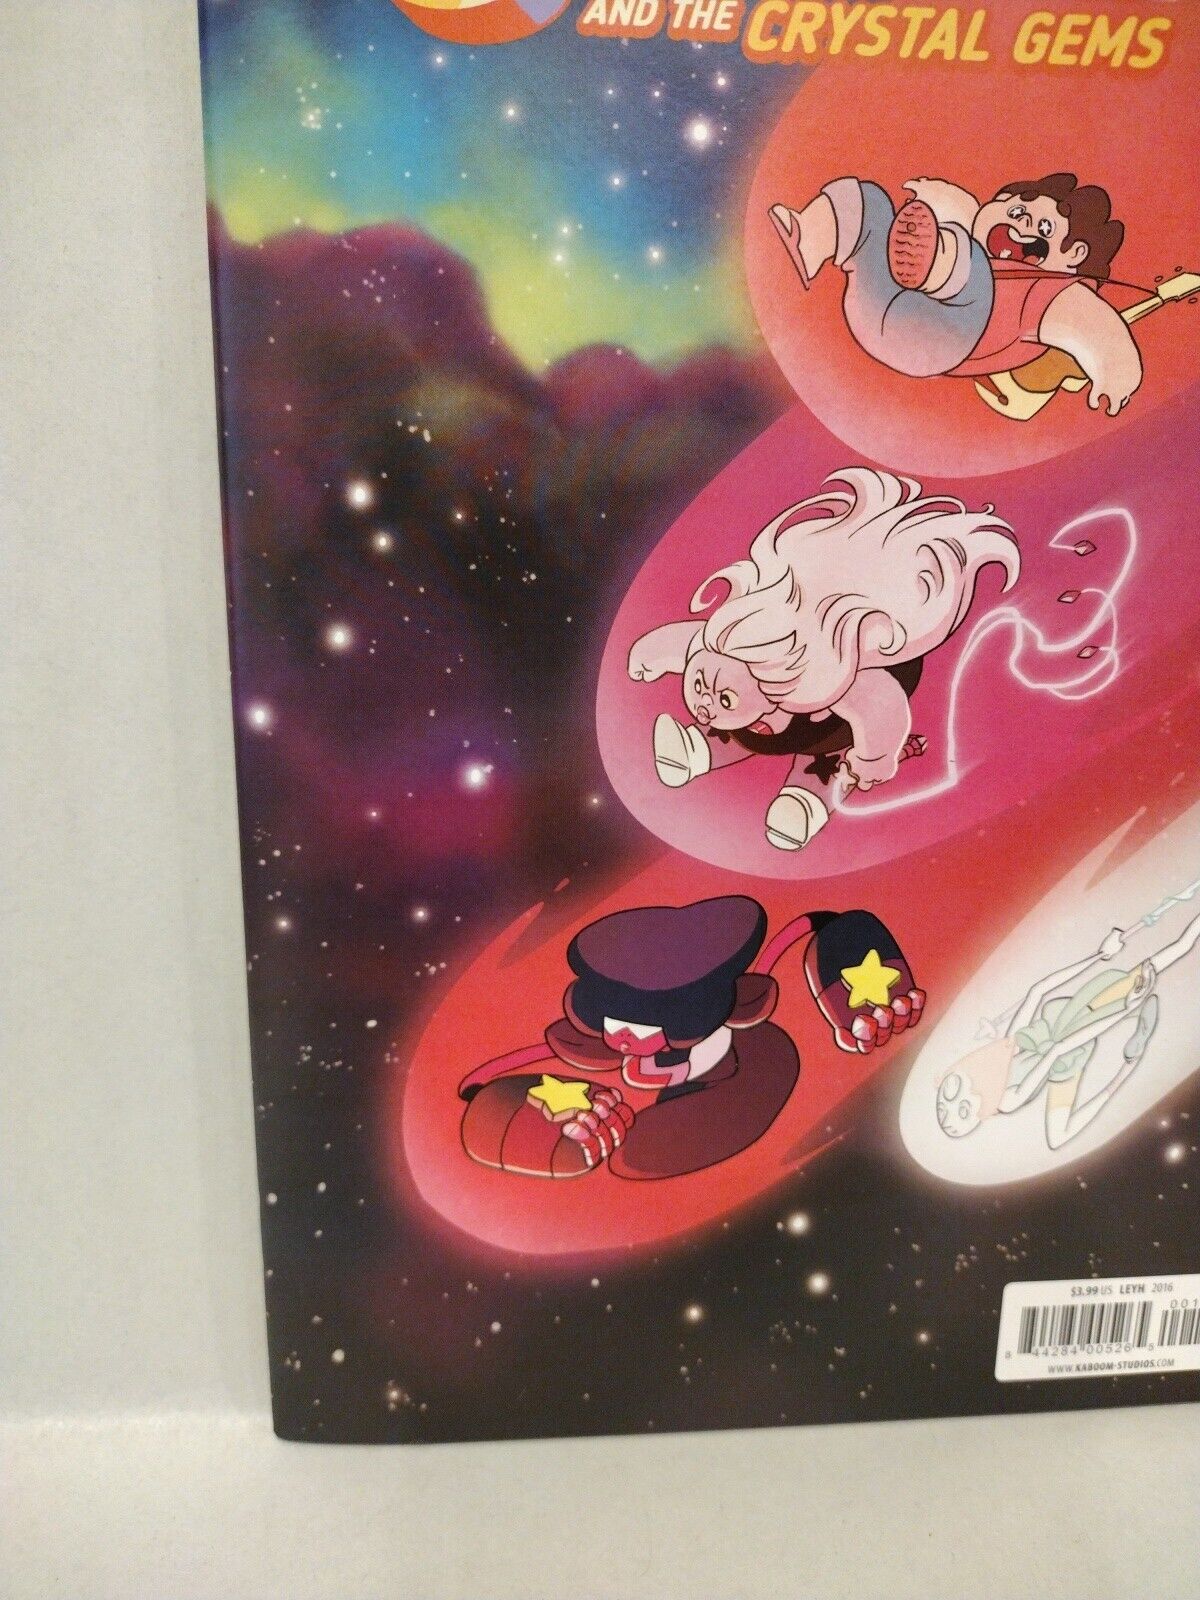 Steven Universe And The Crystal Gems 1 (2016) Boom Studios Comic LEYH Cover A NM